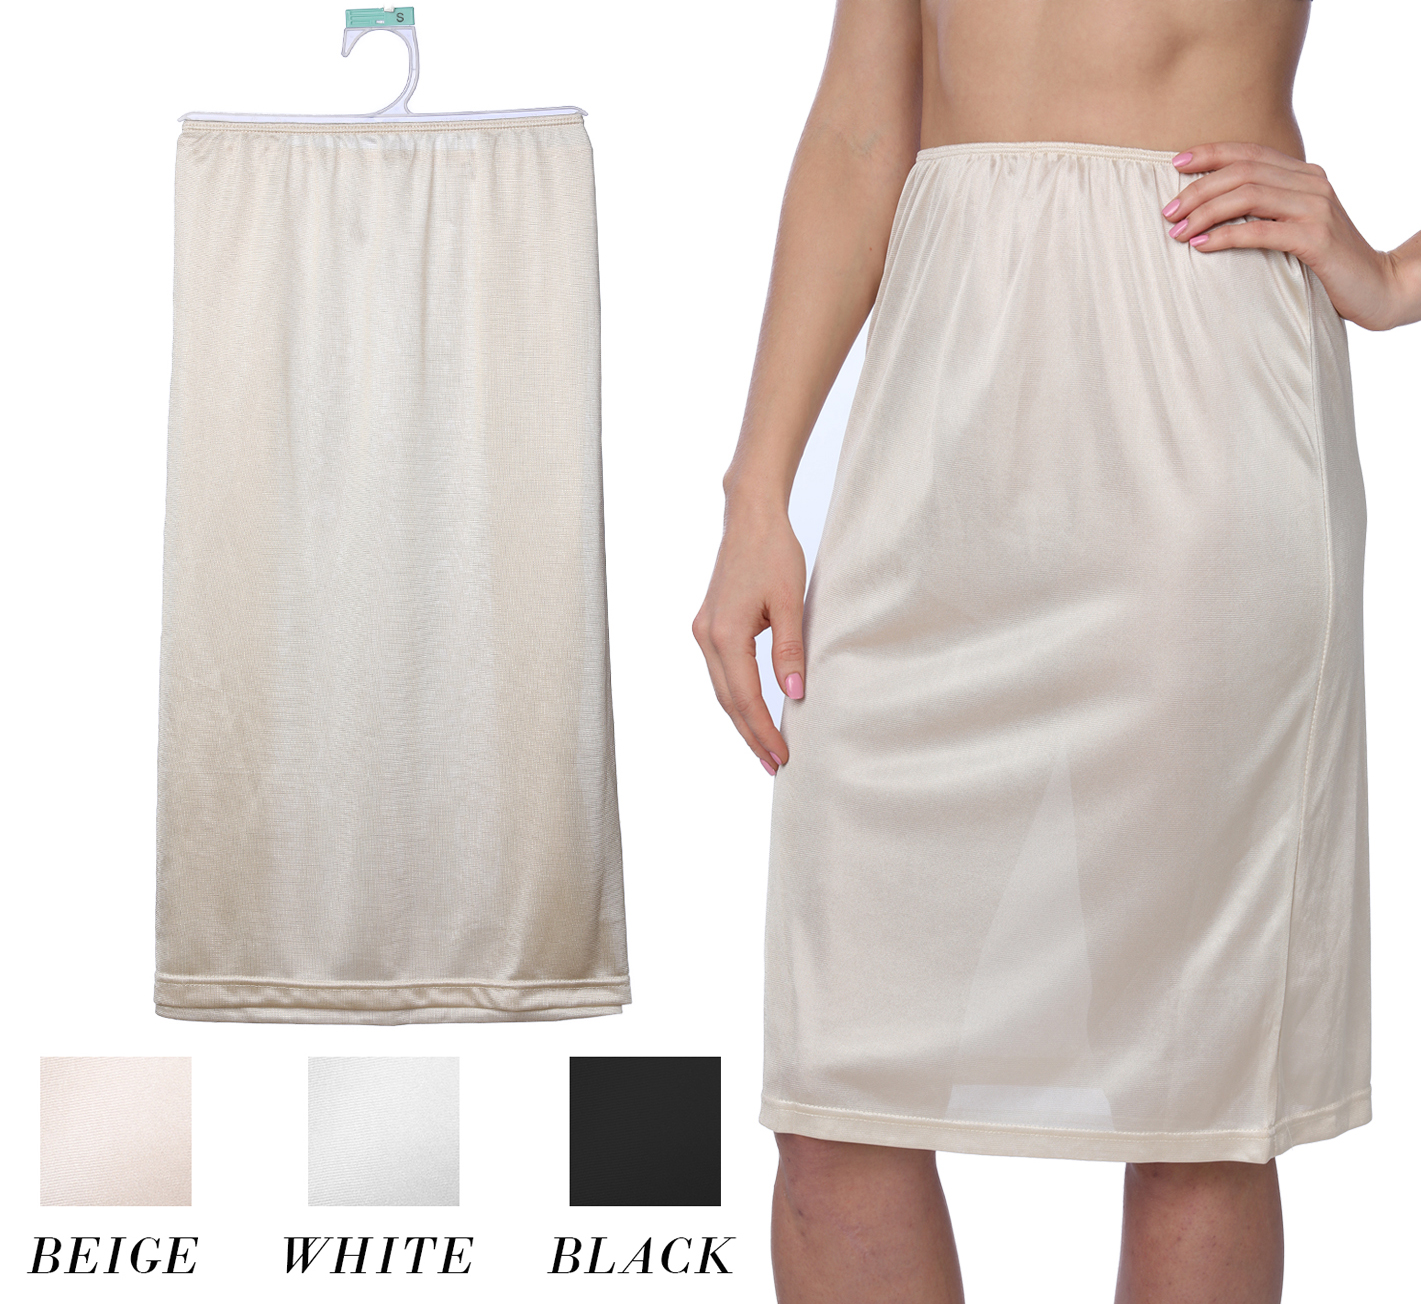 Women's SKIRT Slips w/ Solid Trim - Choose Your Color(s)